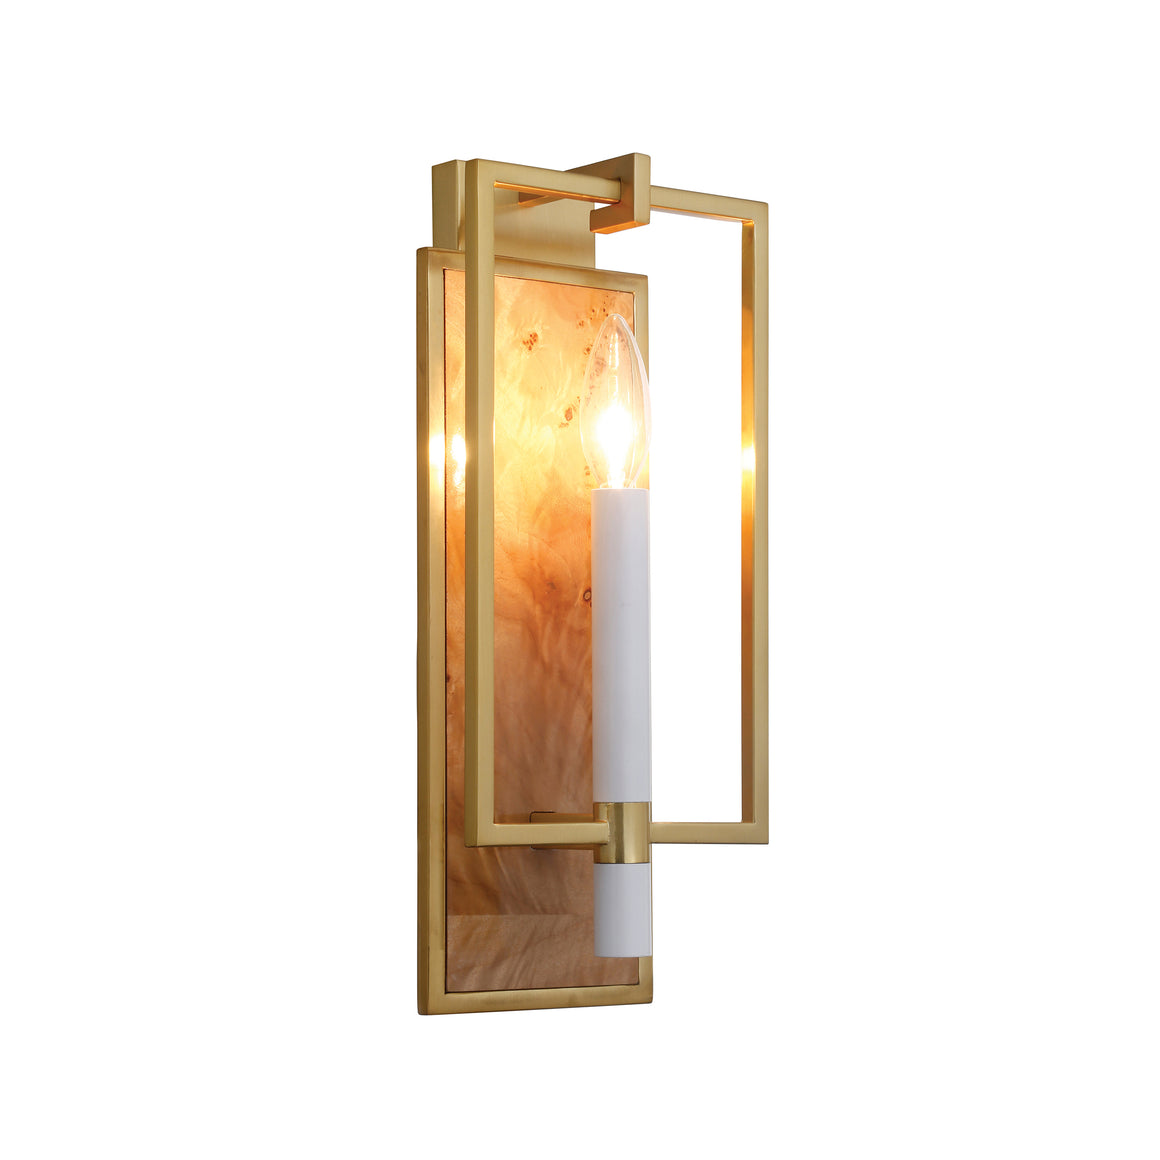 Taurus Candlestick Sconce with Burl Wood Backplate